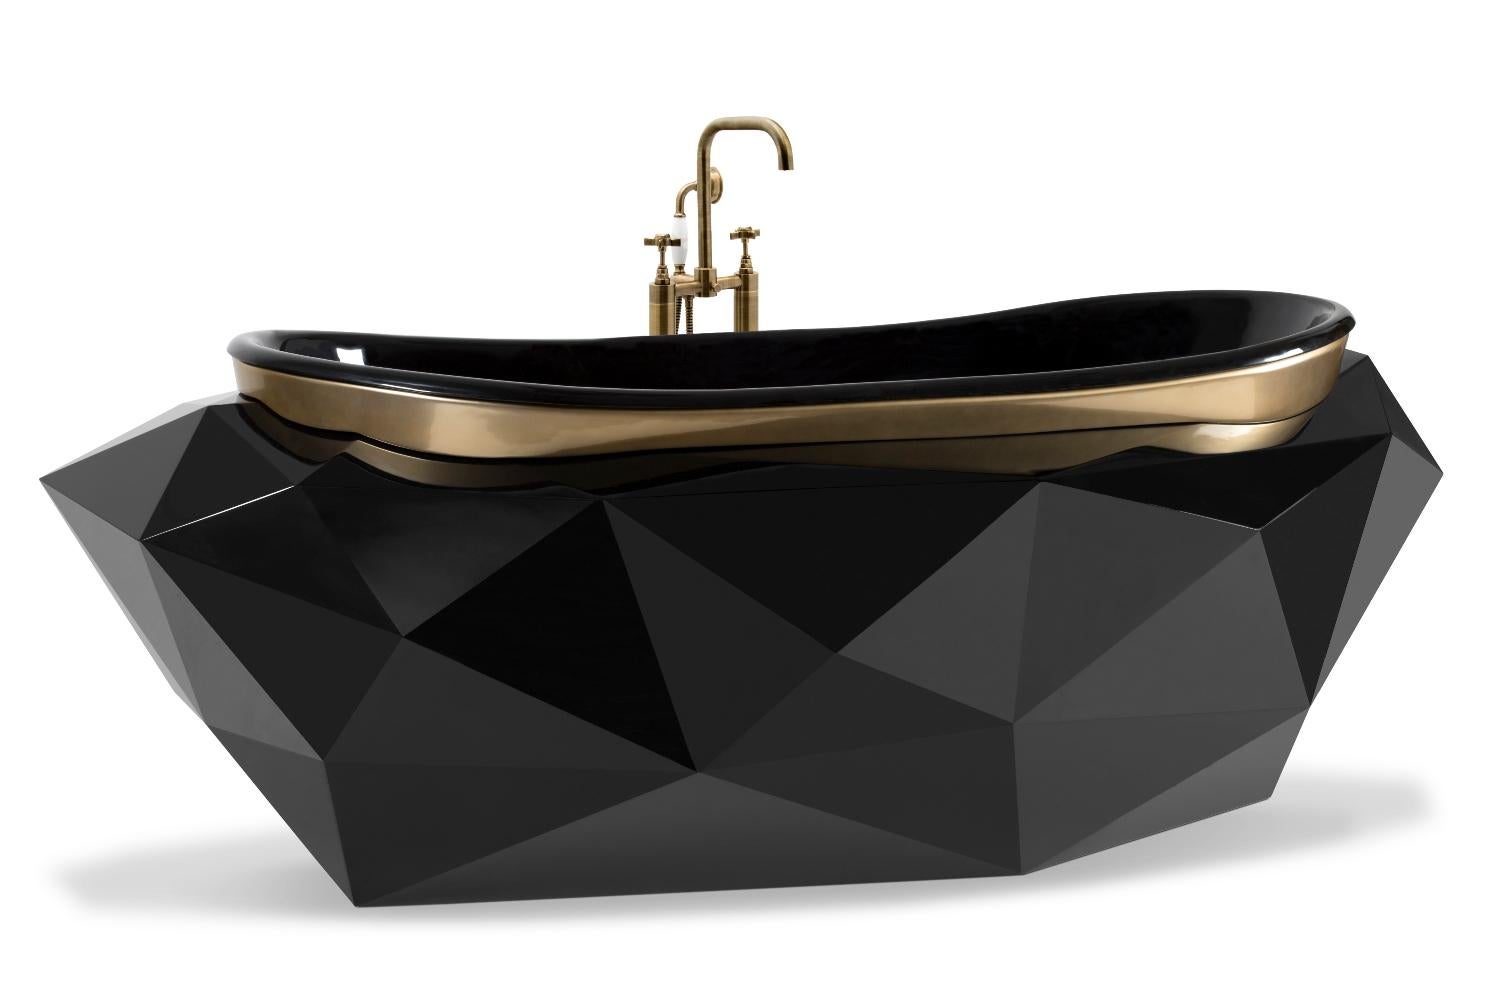 The Diamond Bathtub is wonderful. It features a wooden structure finished in a high gloss black varnish, a color that contrasts perfectly with the gold painted rim, covered in high gloss black varnish, providing the perfect item for a darker shade